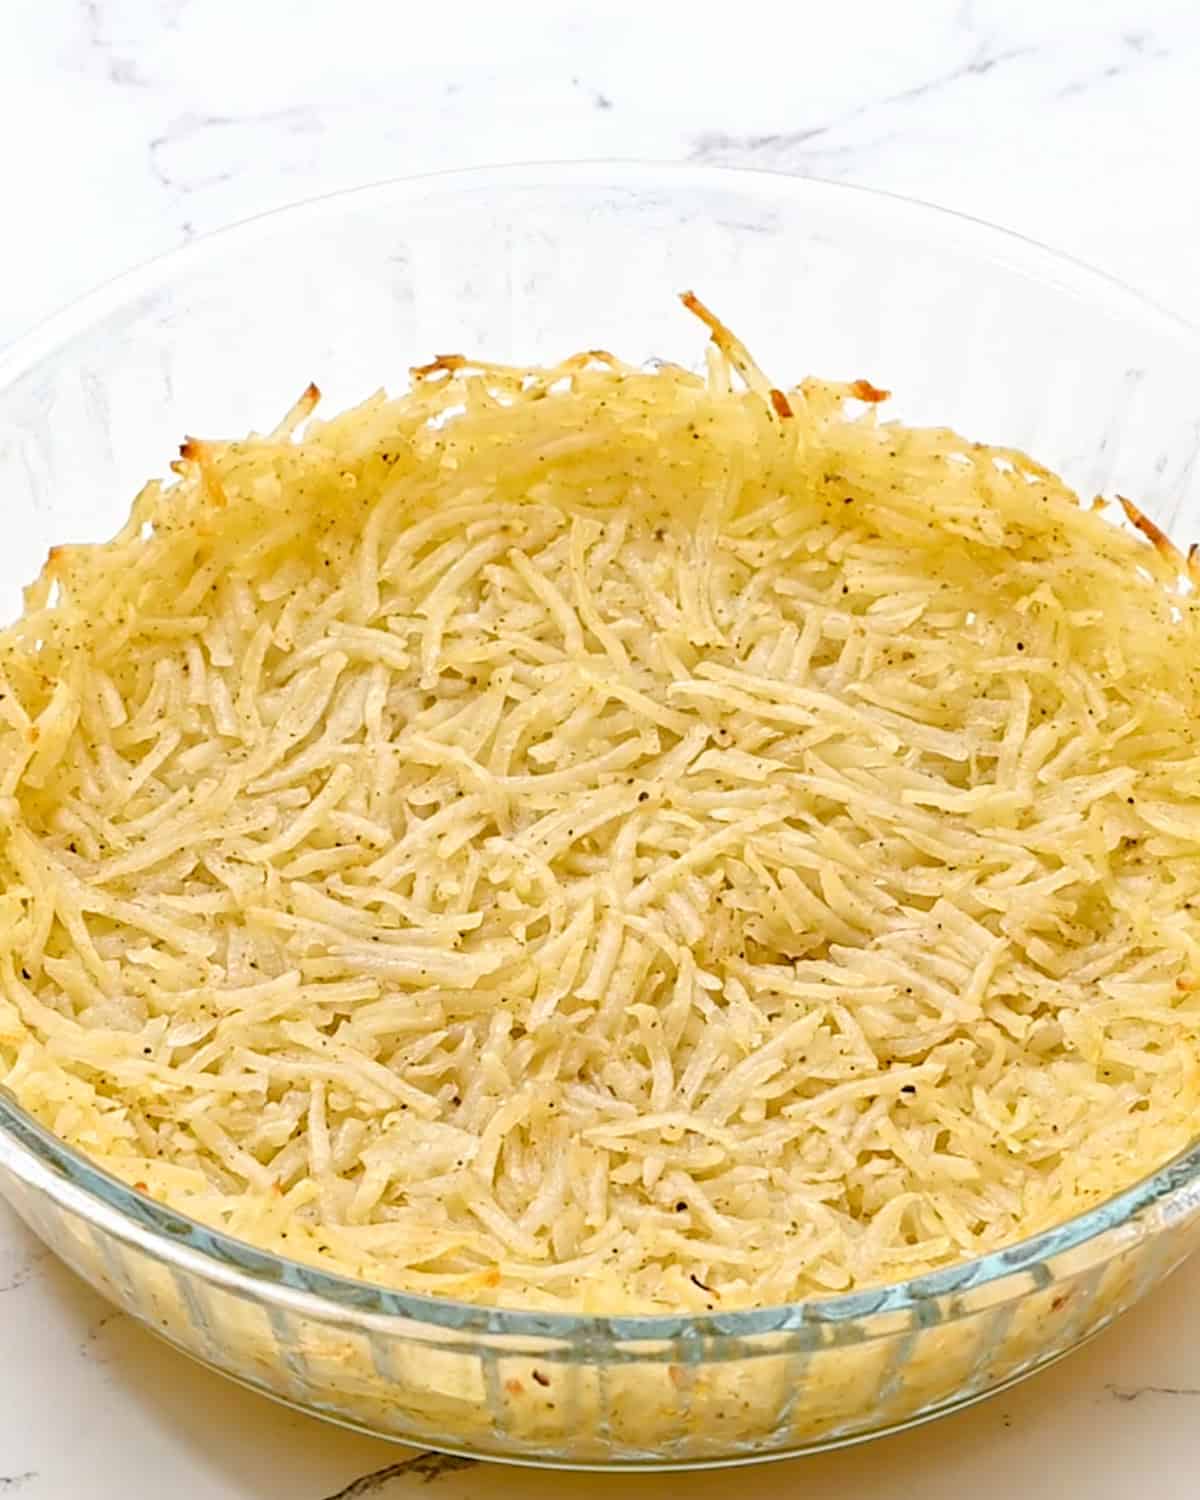 hash brown crust in a pie dish after baking